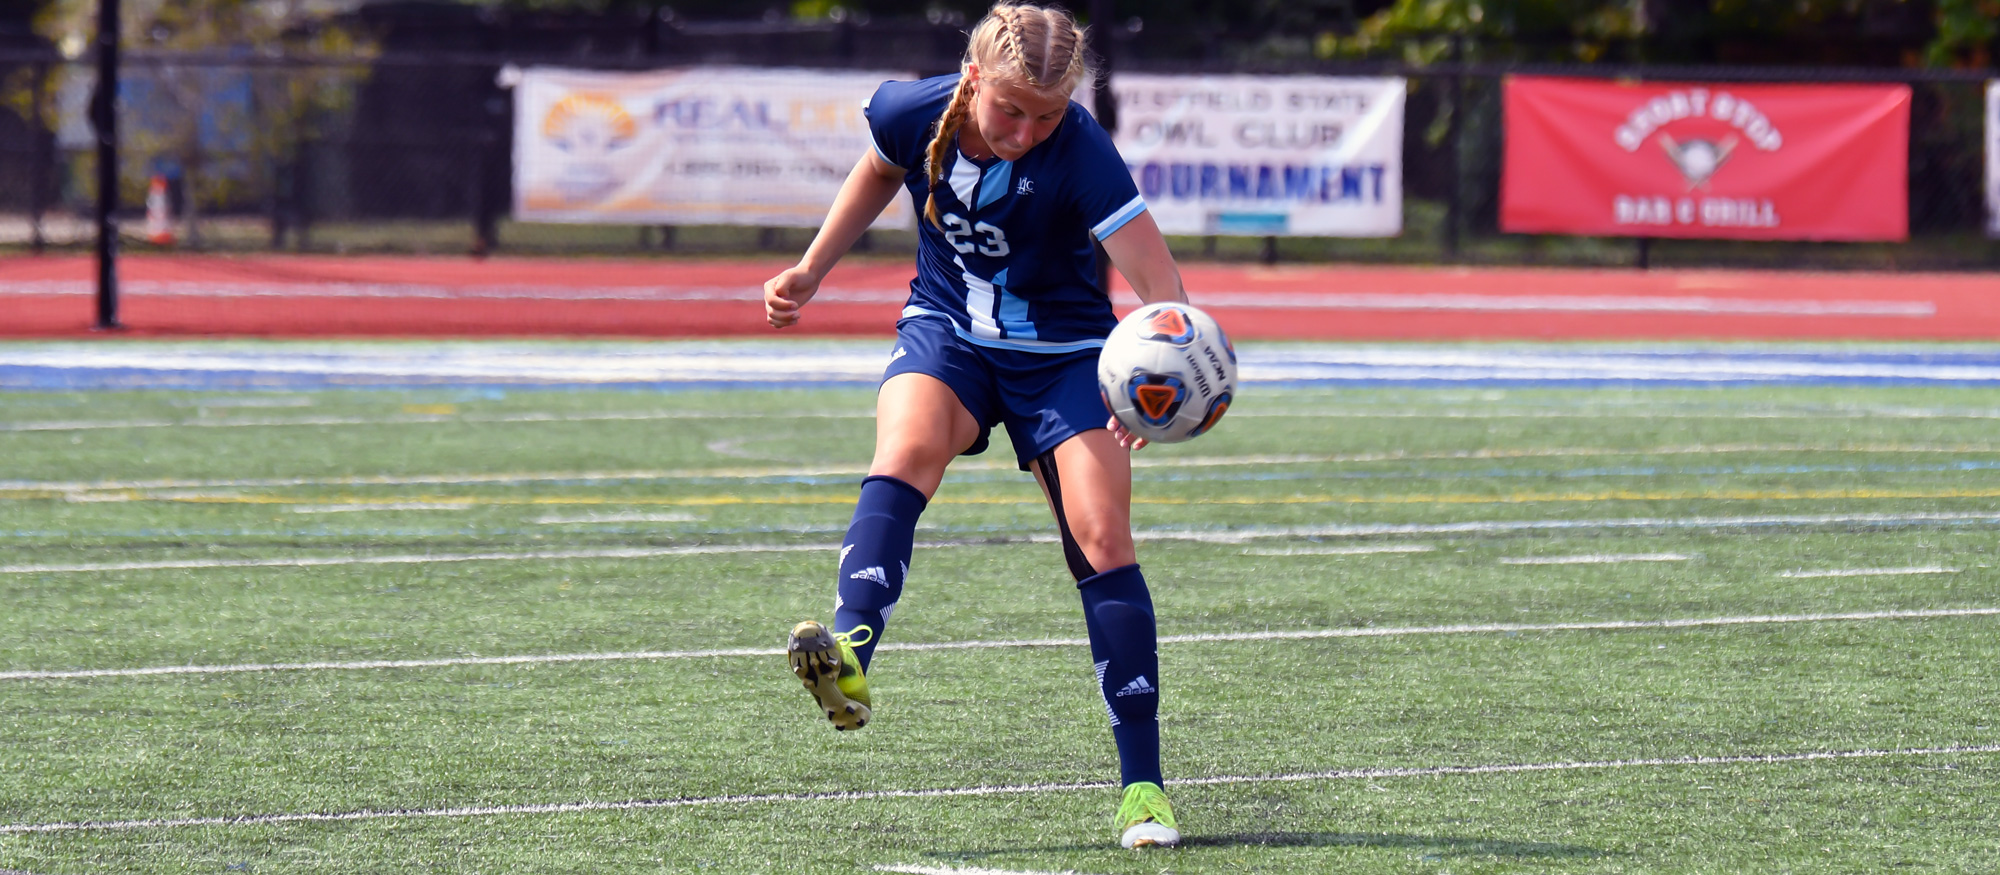 First-year Ada Siepmann notched her first collegiate goal in Mount Holyoke's loss to Wheaton (Mass.) College on Oct. 8, 2022. (RJB Sports file photo)